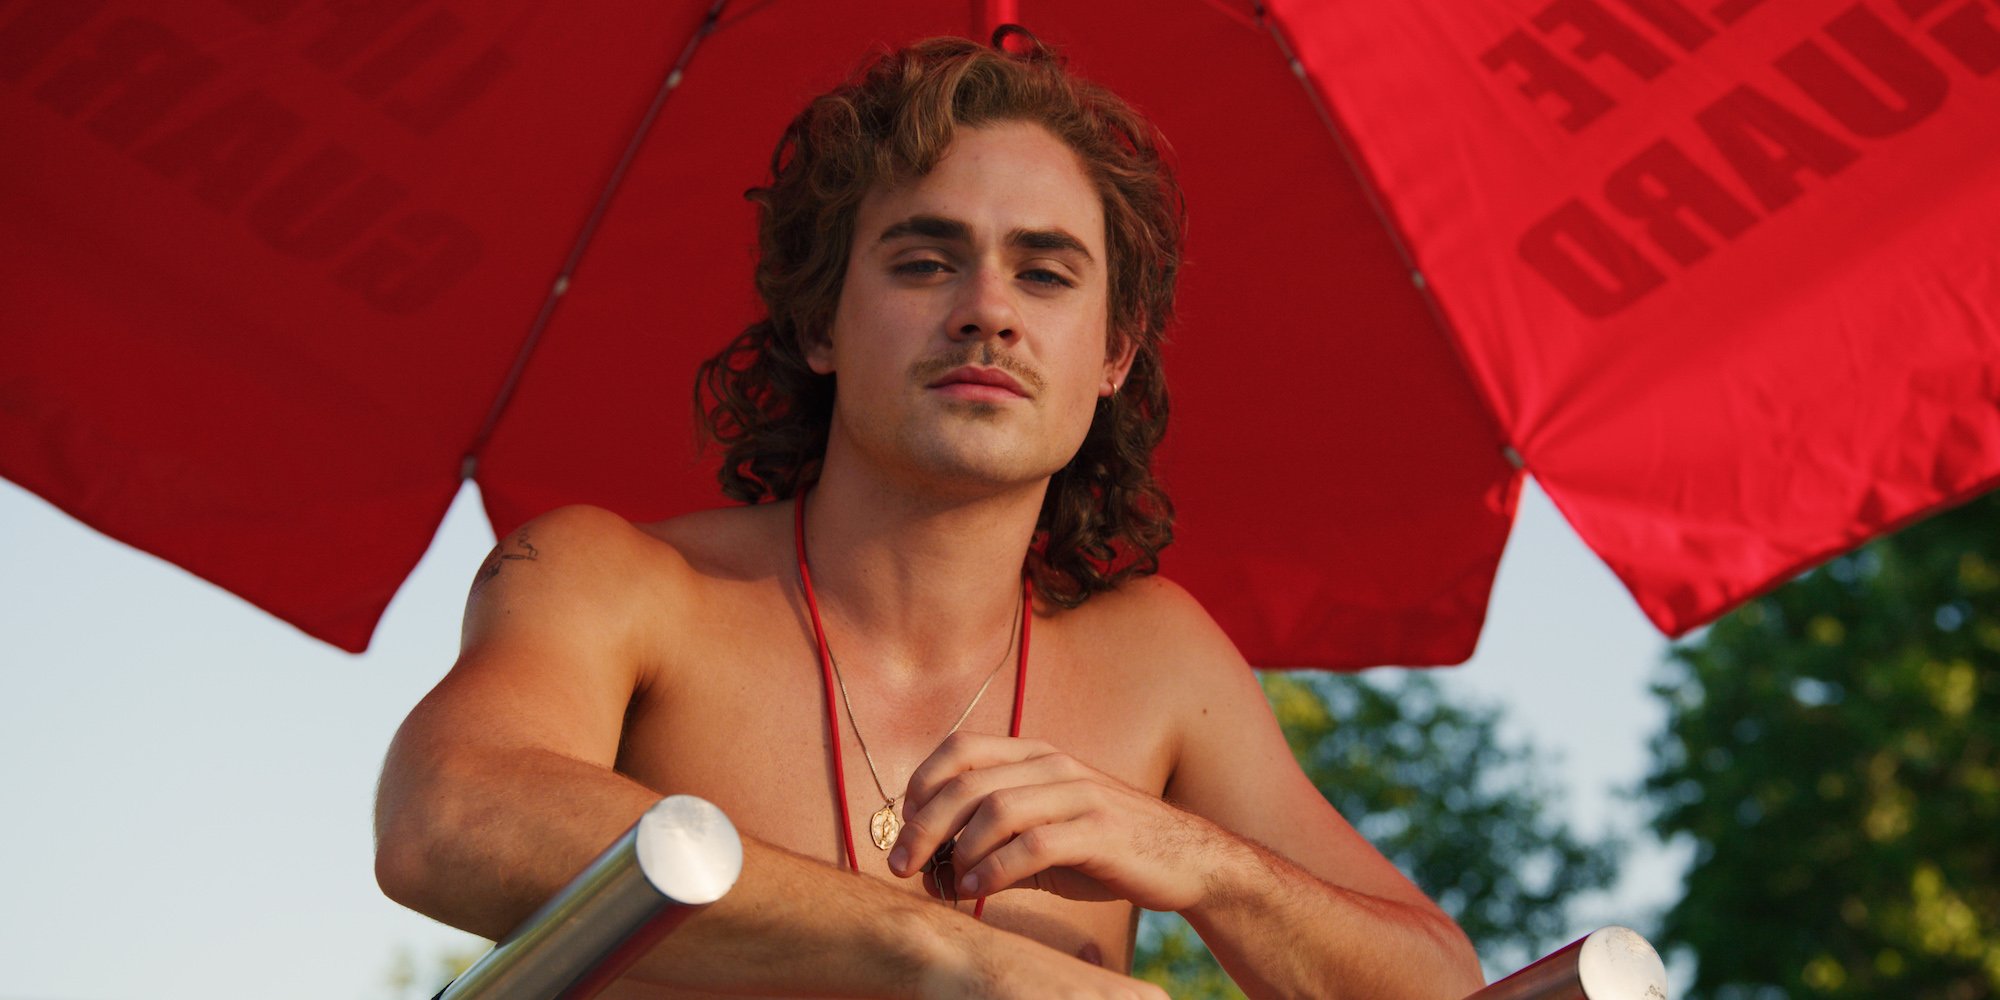 Dacre Montgomery, who plays Billy Hargrove, seen here in red swim trunks, died in 'Stranger Things' Season 3, but ithe actor will return for at least one episode of 'Stranger Things' Season 4.